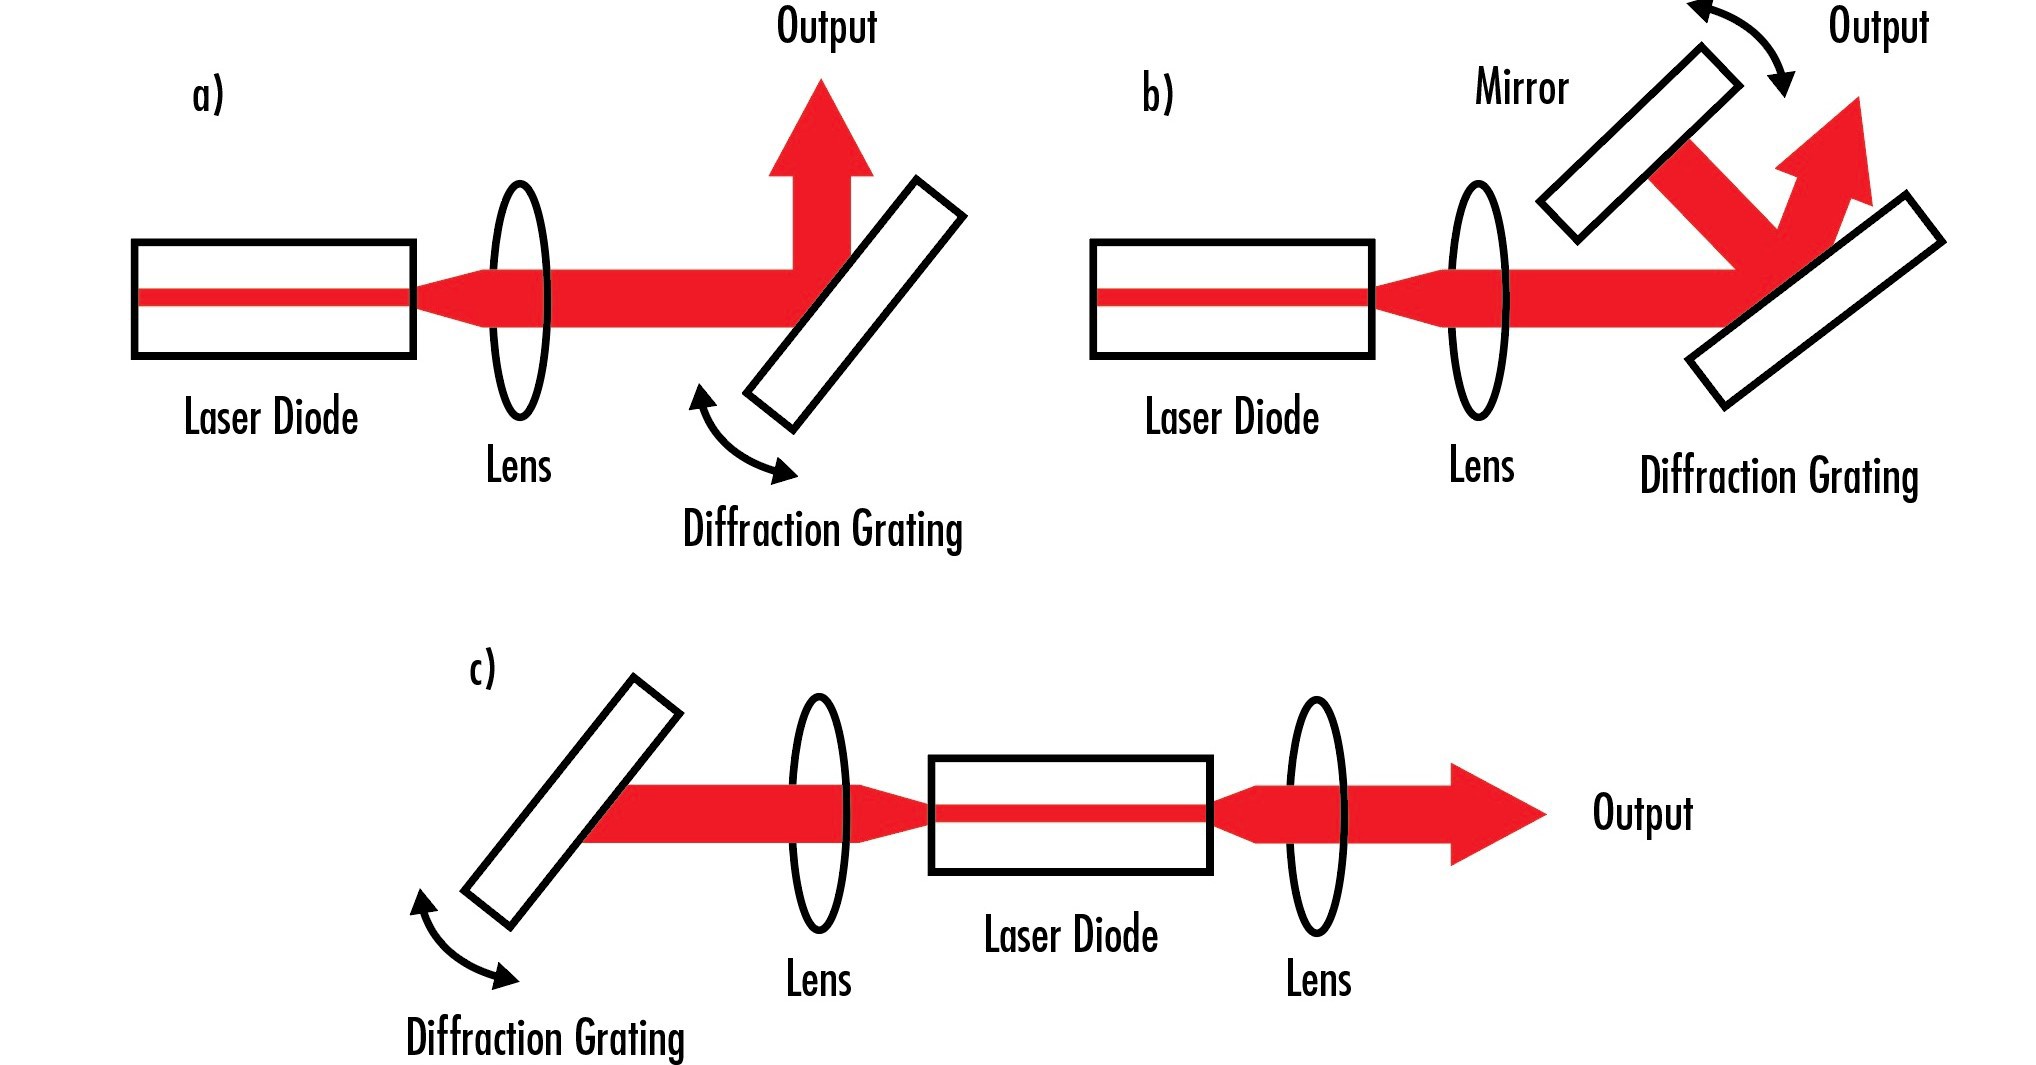 These three setups show the different ways that gratings can be used to tune a laser’s output wavelengths or narrow the output wavelength range